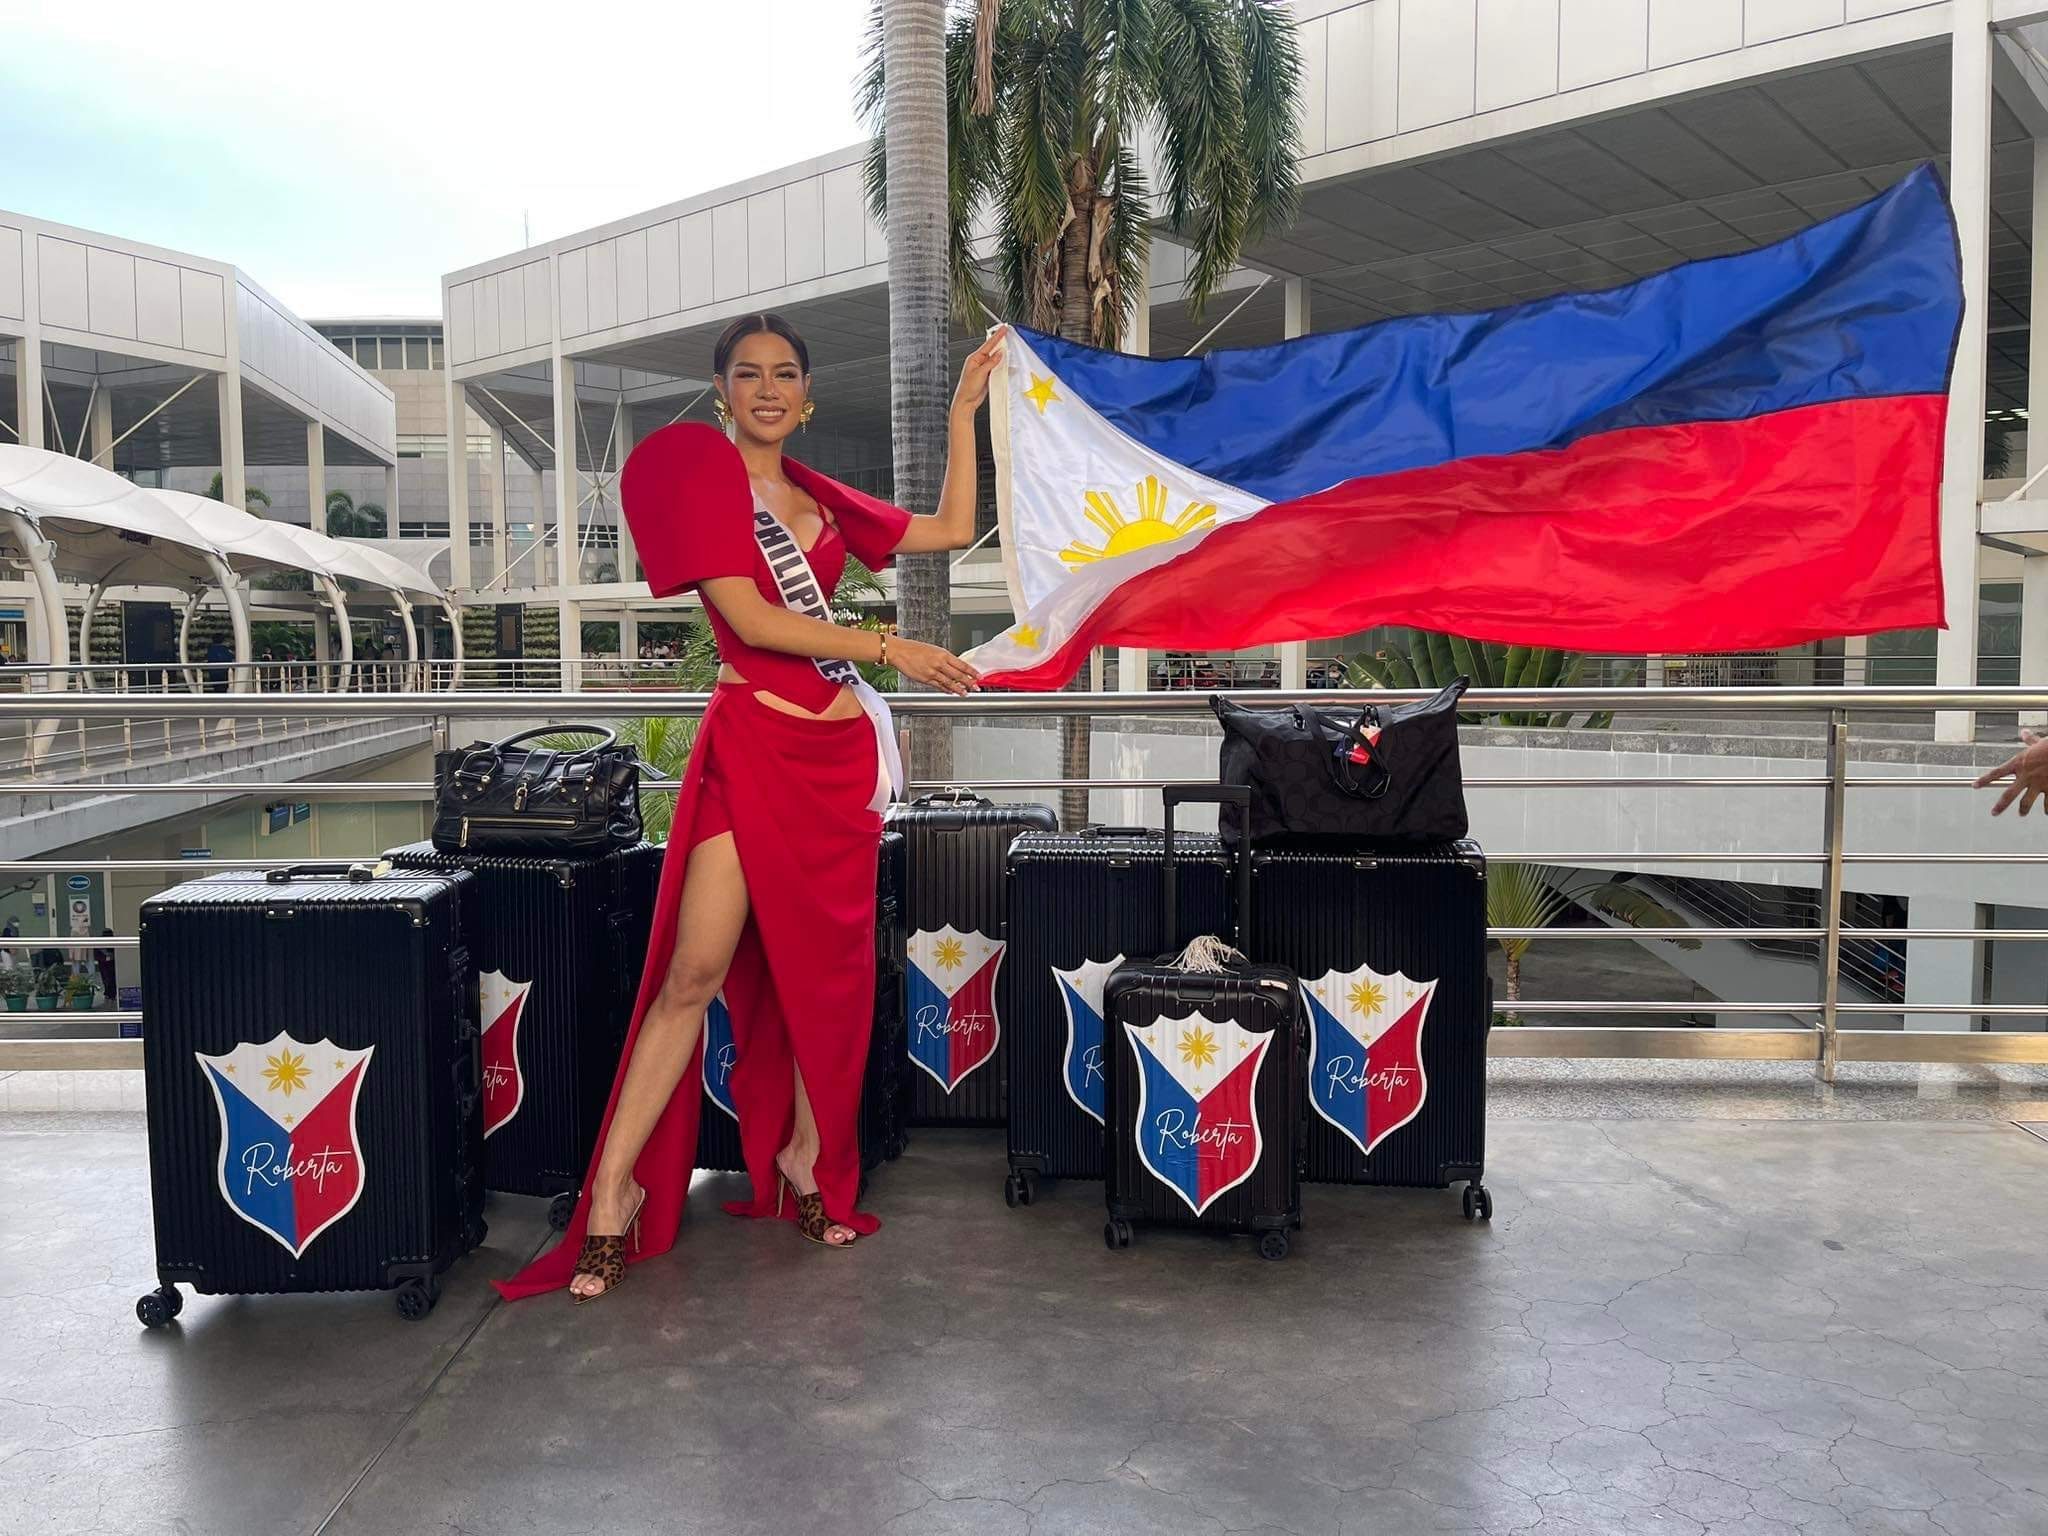 LOOK: Roberta Tamondong arrives in Indonesia for Miss Grand International 2022 